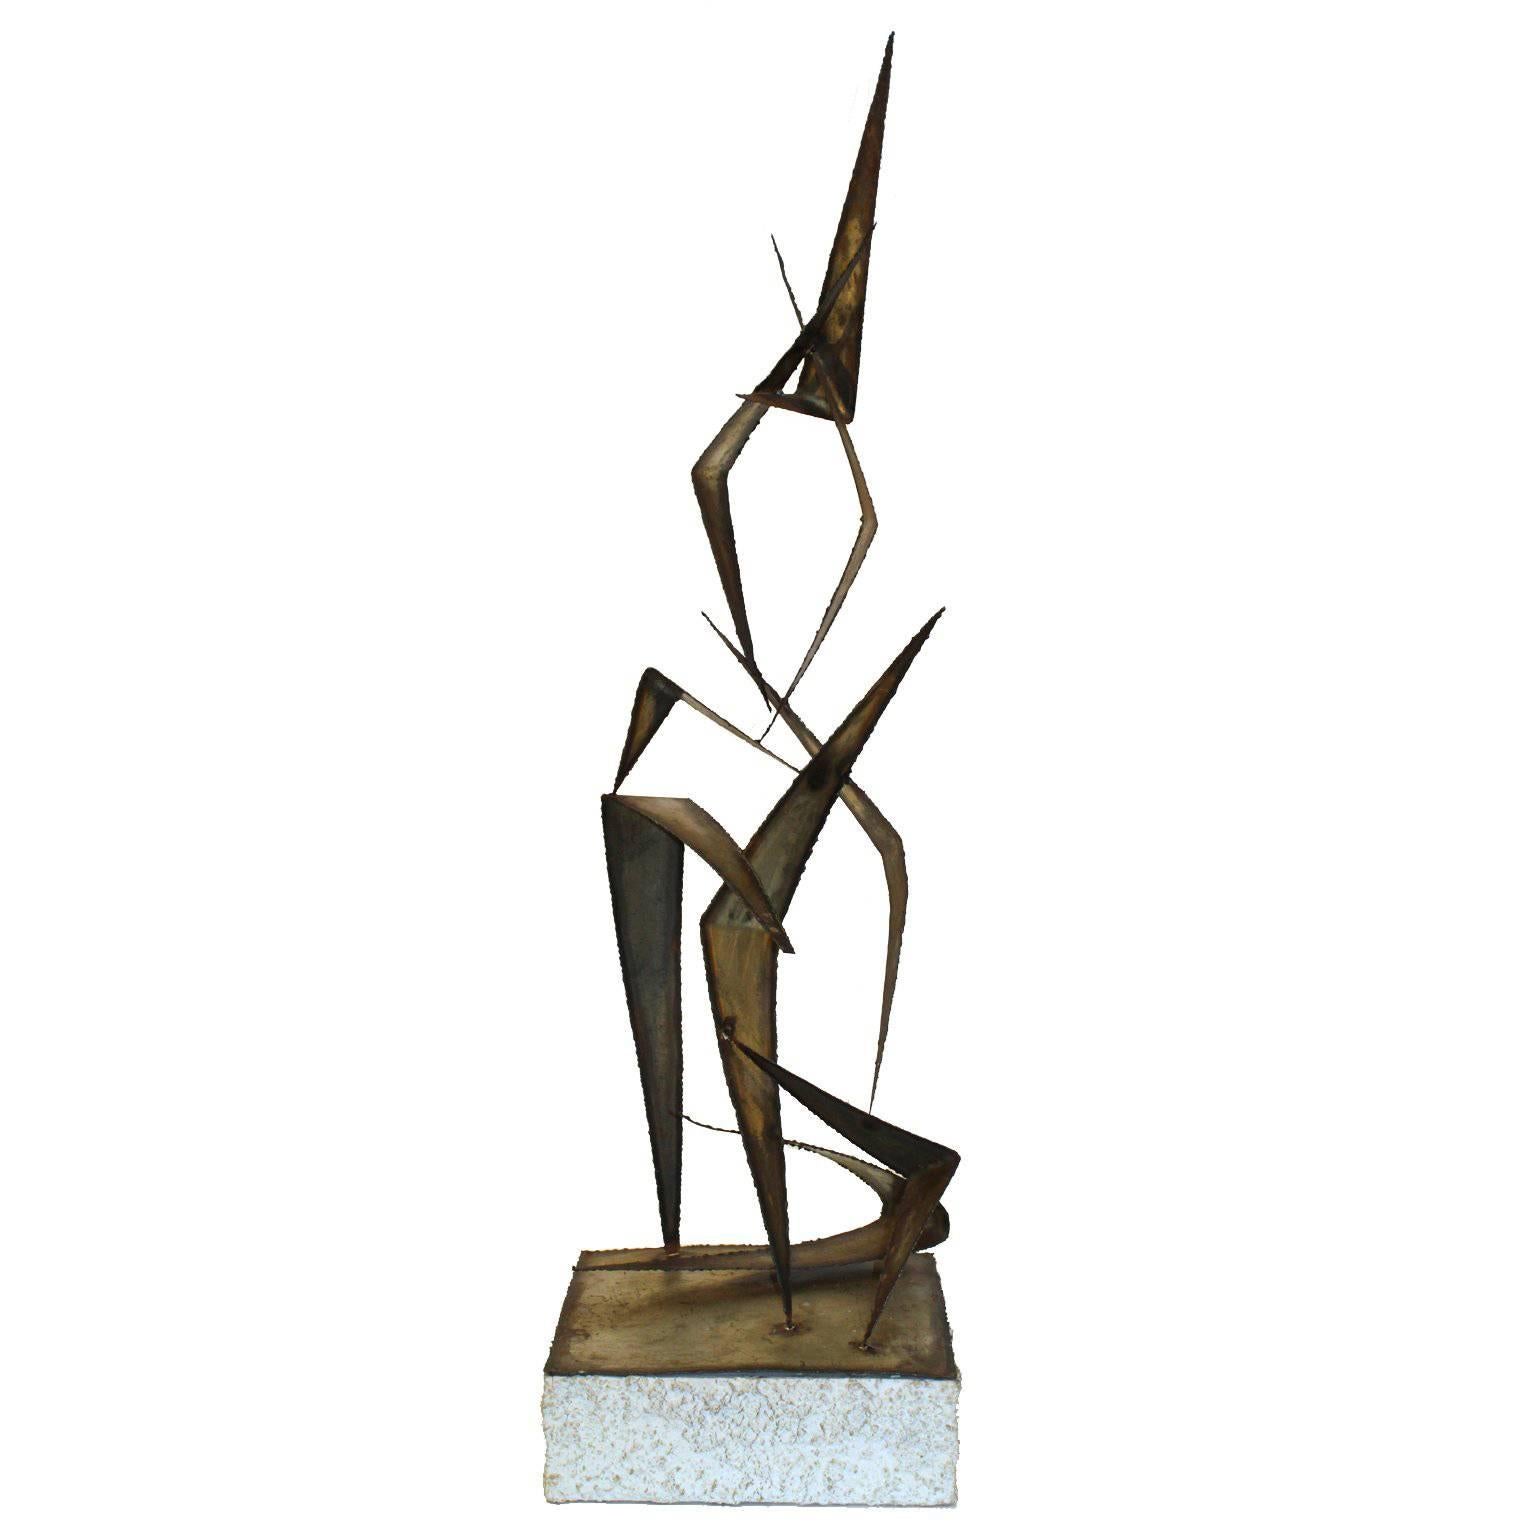 Curtis Jere Midcentury Brutalist Welded and Torched Metal Sculpture